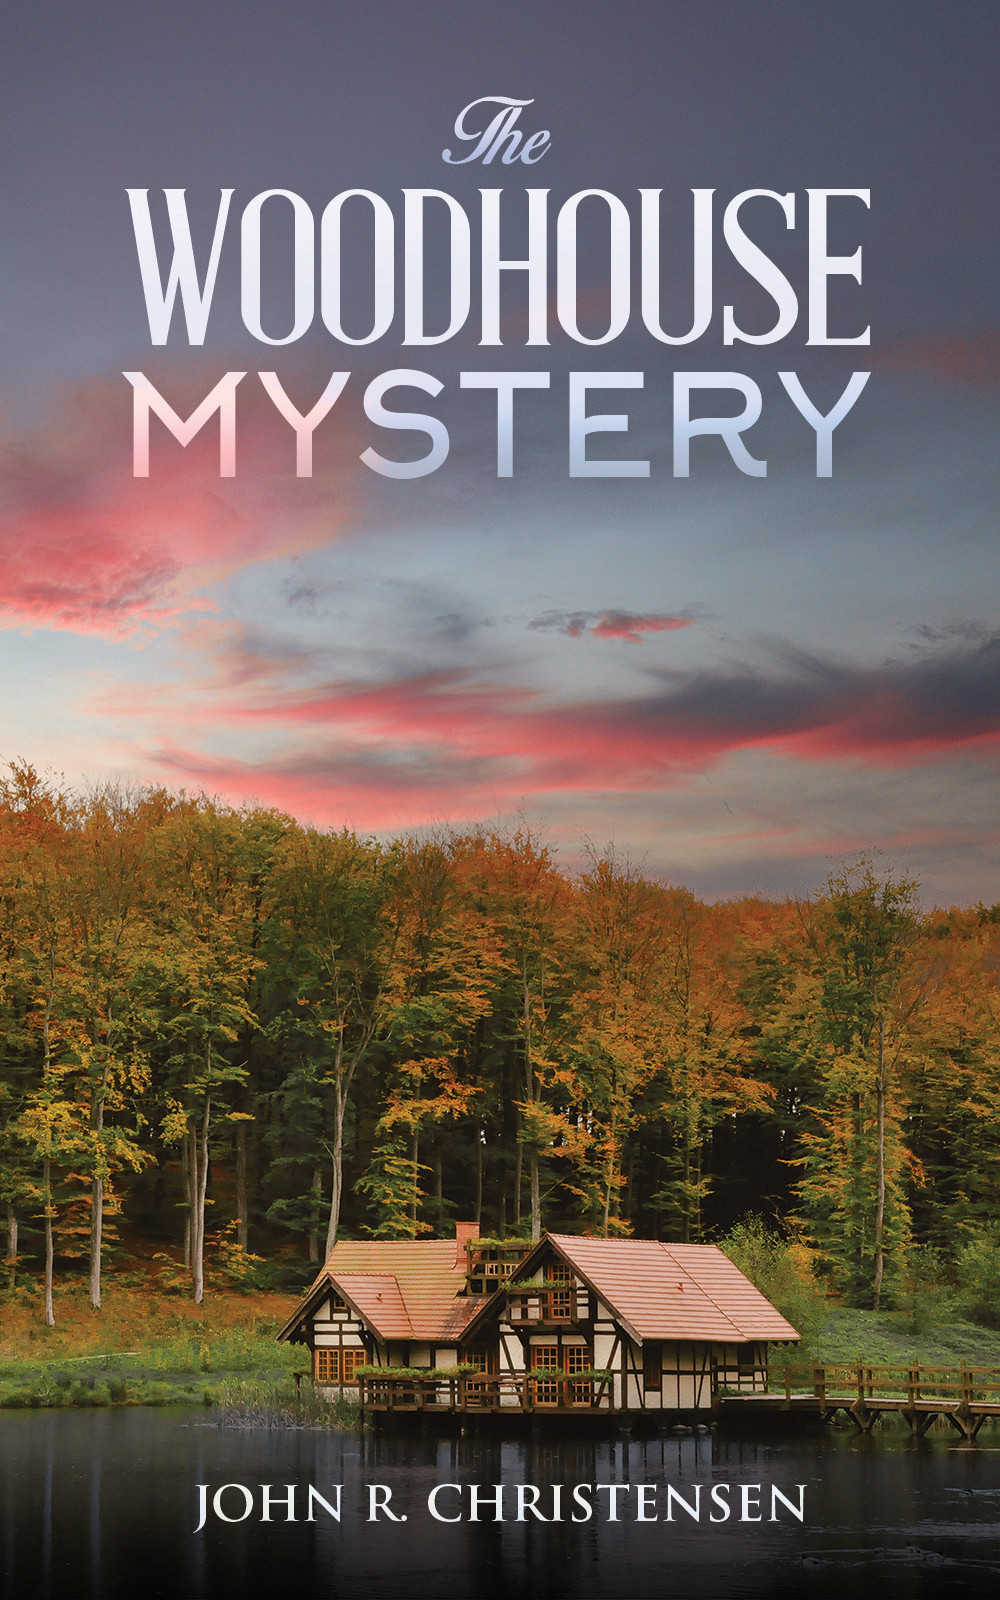 The Woodhouse Mystery